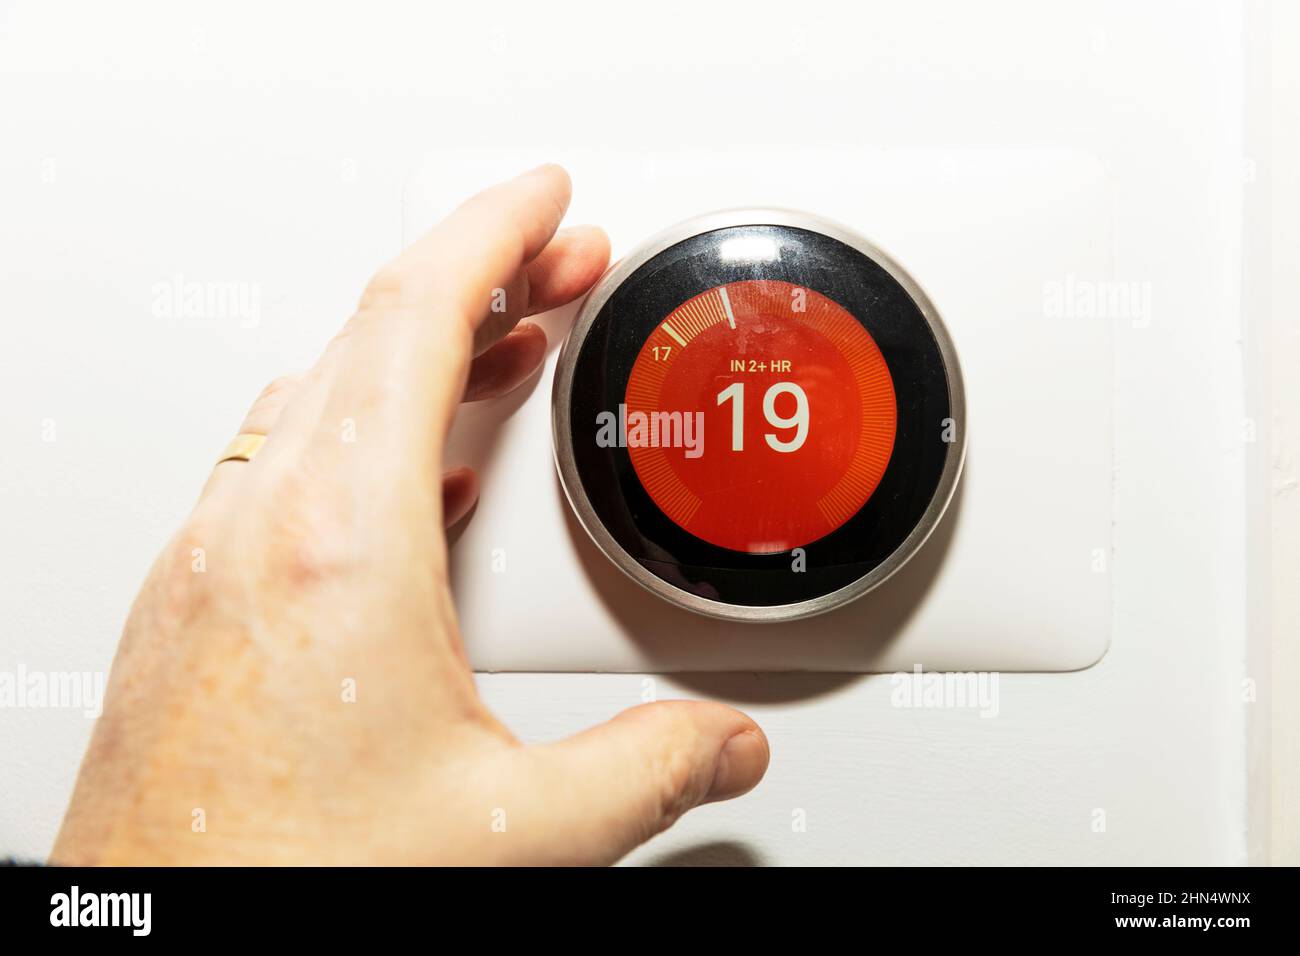 Google Nest, Thermostat, Nest Thermostat, turning down thermostat, gas prices, energy bills, Google nest thermostat, heating, bills, energy prices, Stock Photo